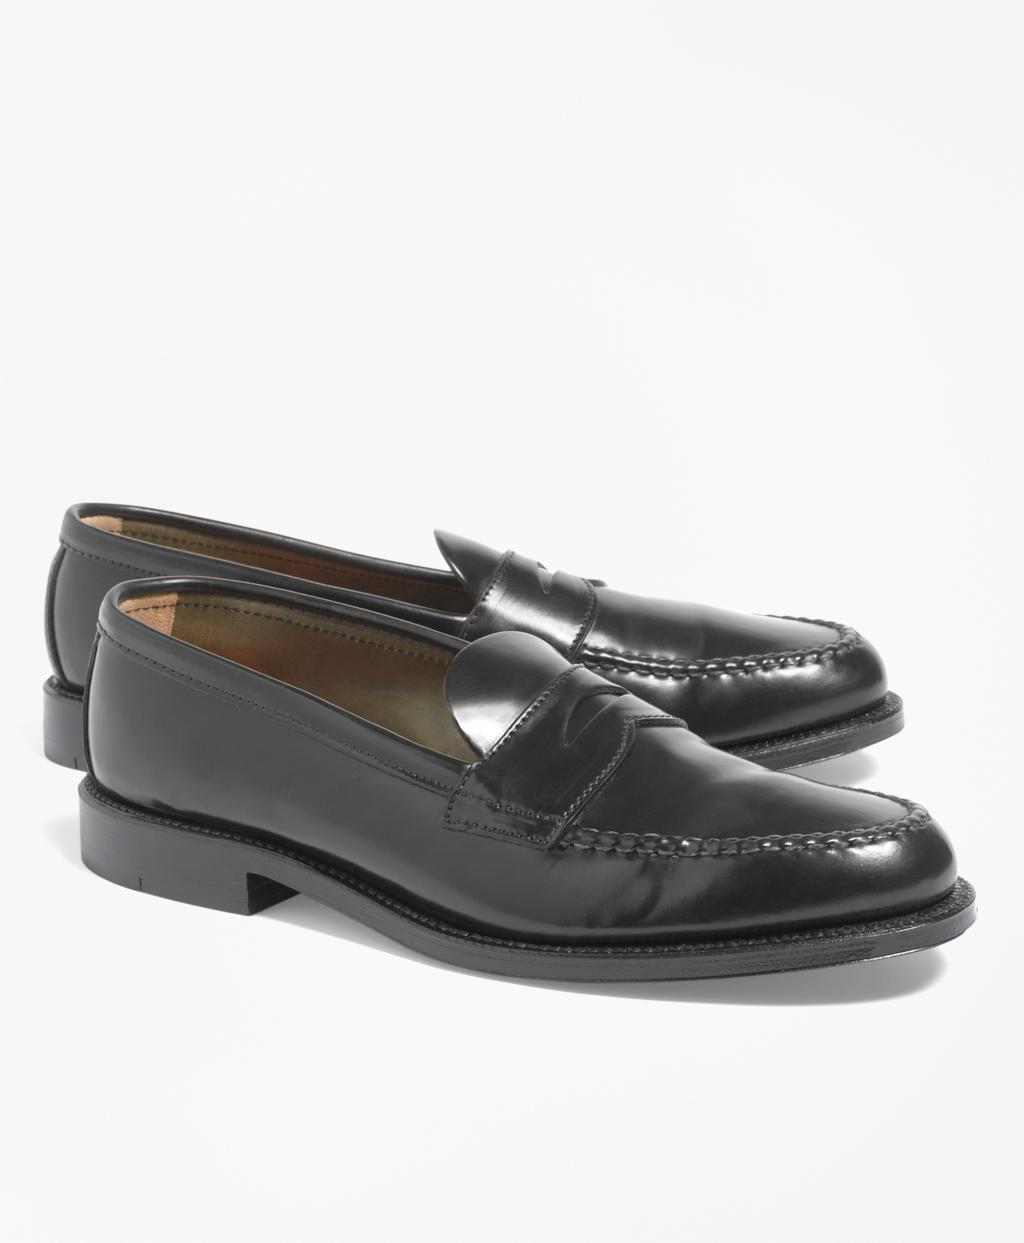 Lyst - Brooks Brothers Cordovan Unlined Penny Loafers in Black for Men ...